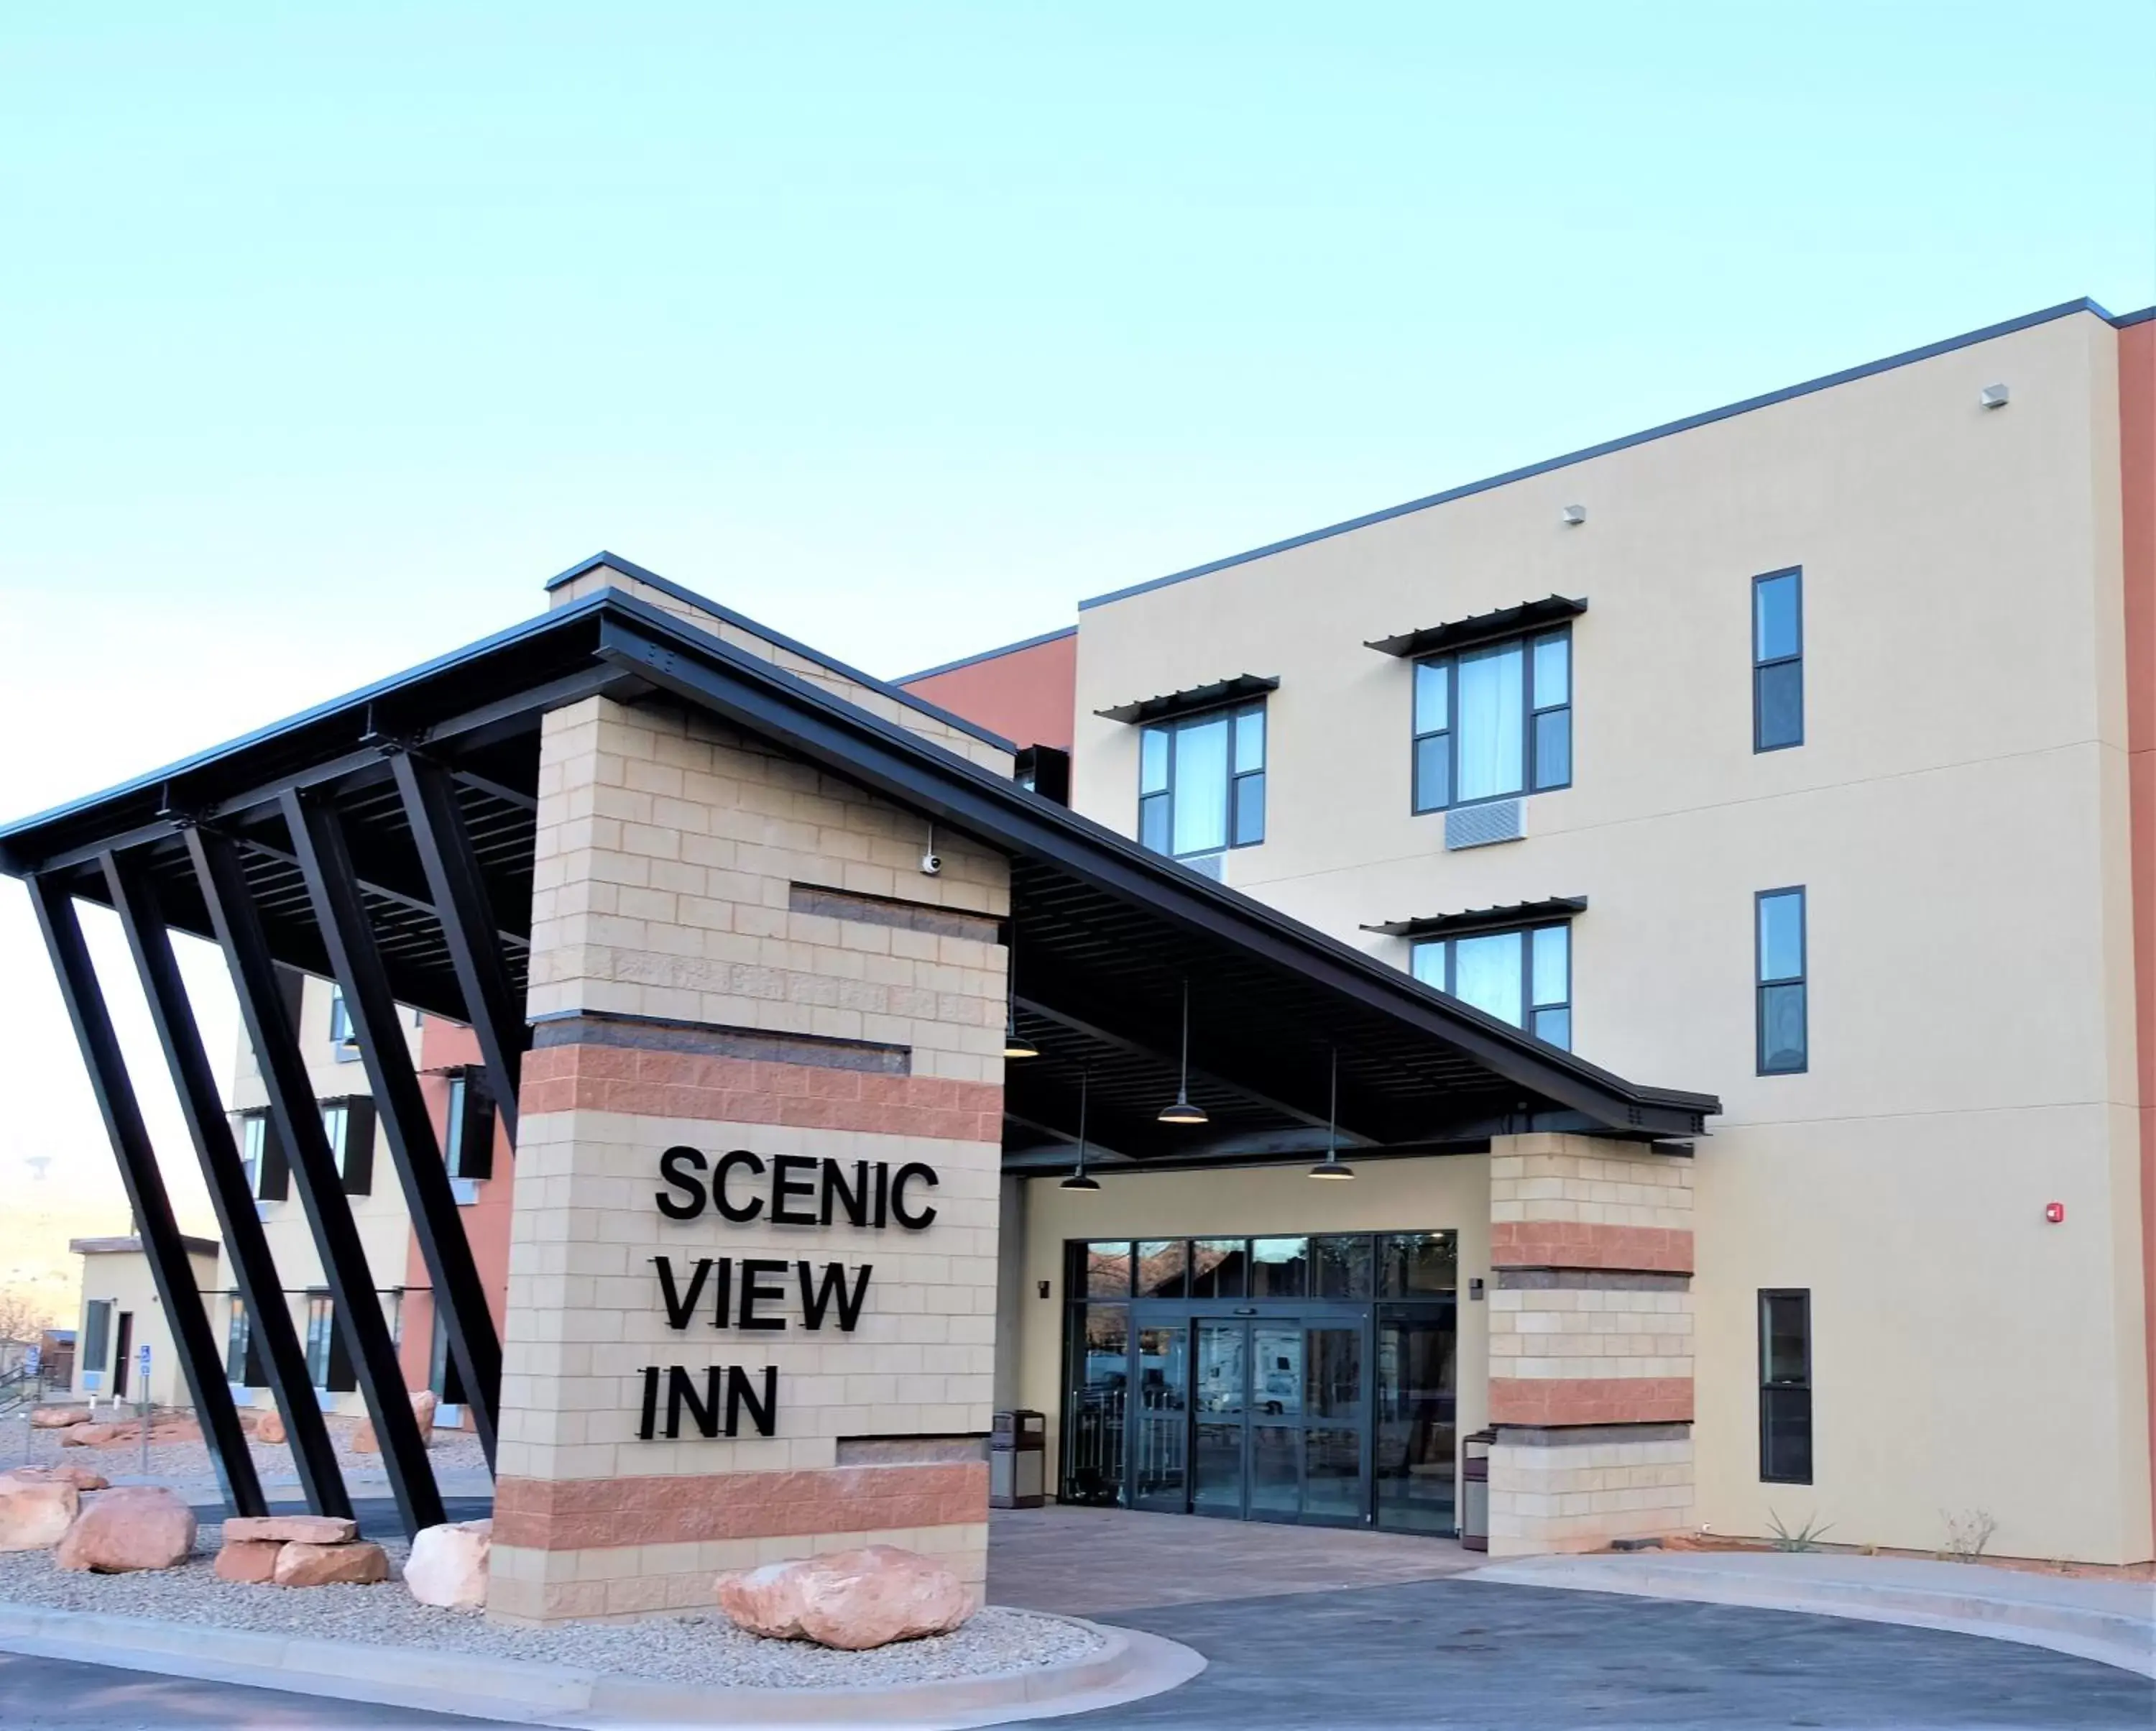 Facade/entrance in Scenic View Inn & Suites Moab